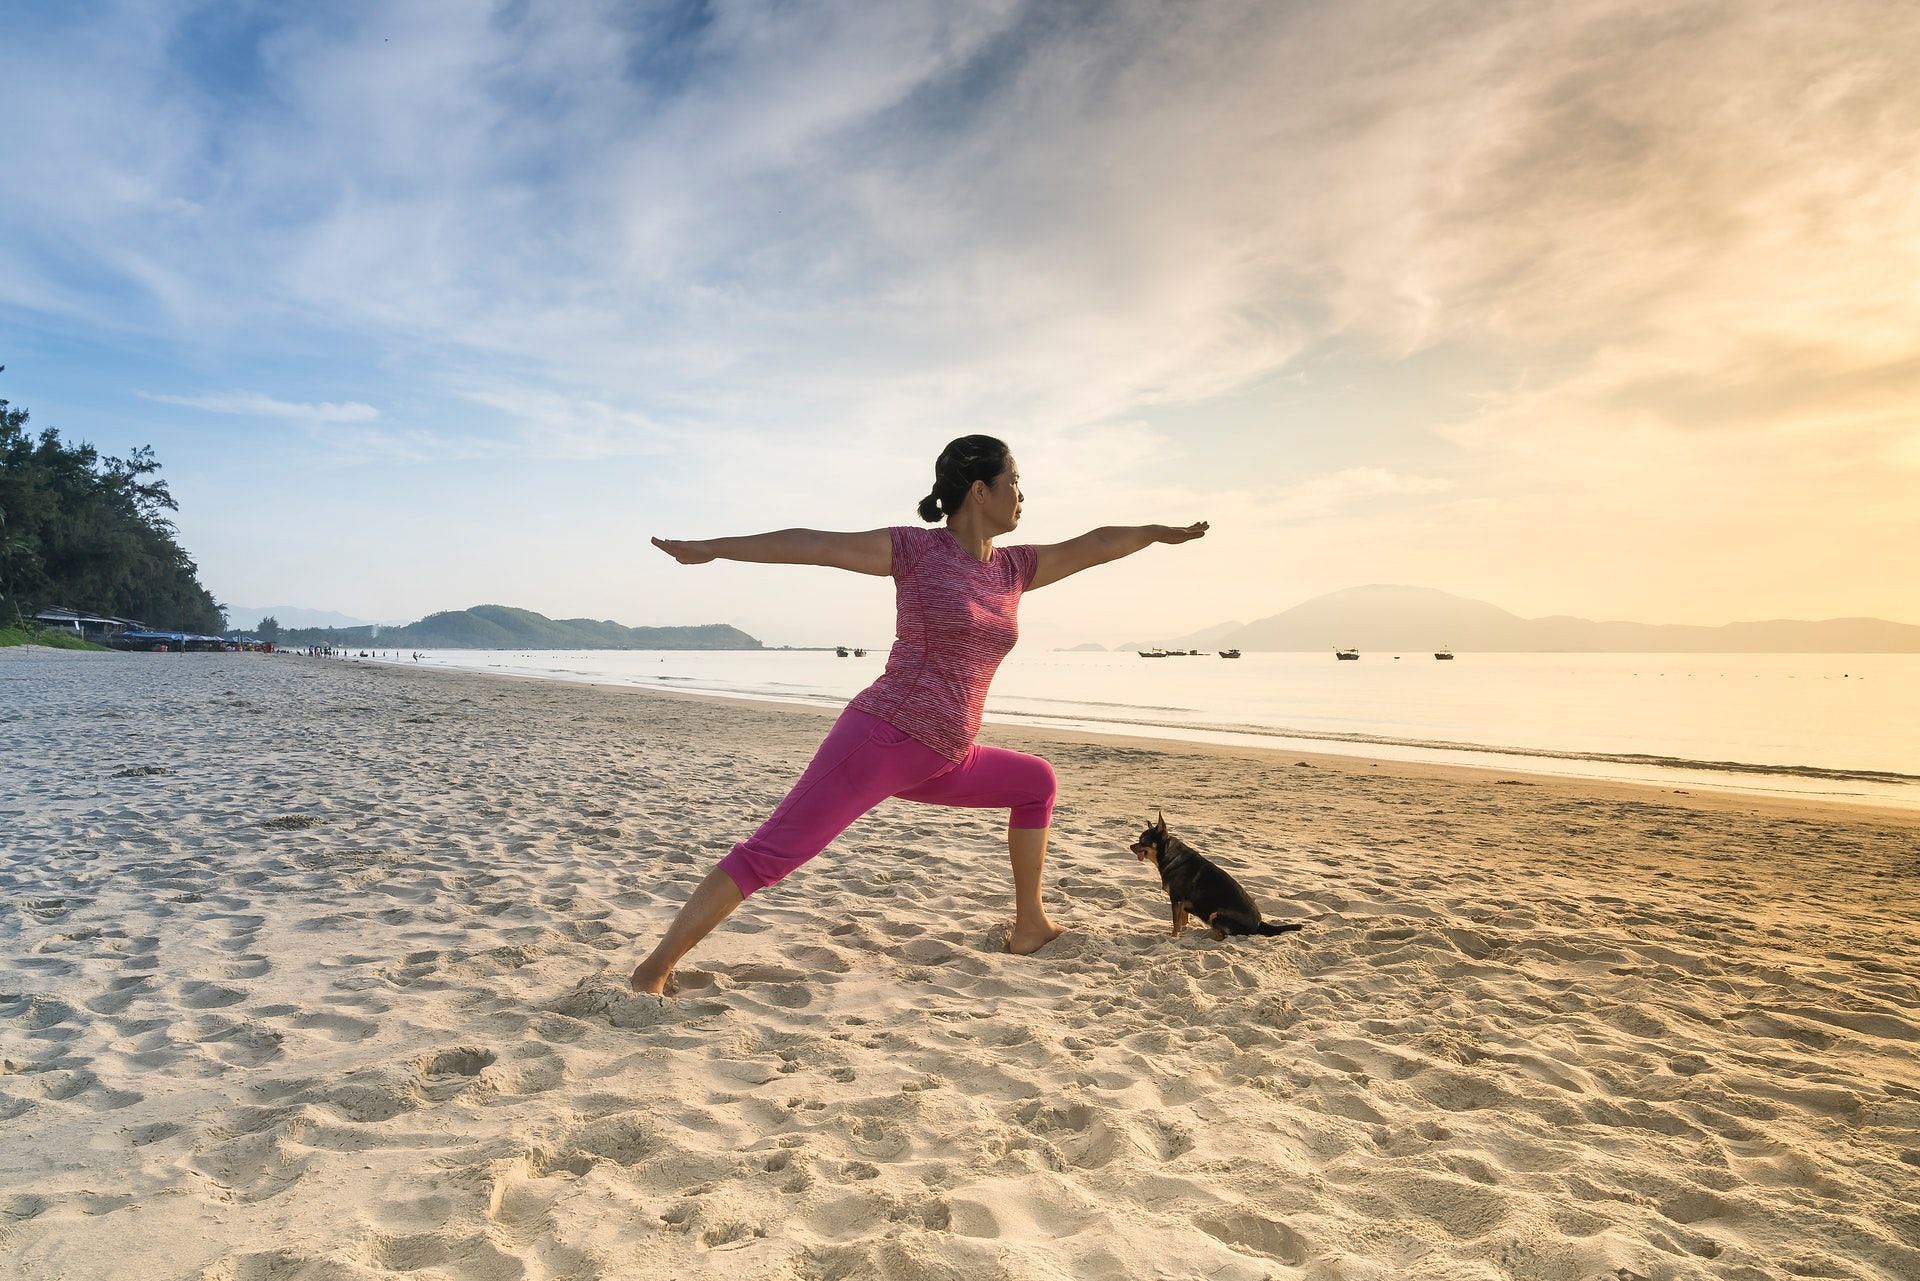 Yoga exercises can help alleviate stomach problems. (Photo by Quang Nguyen Vinh via pexels)